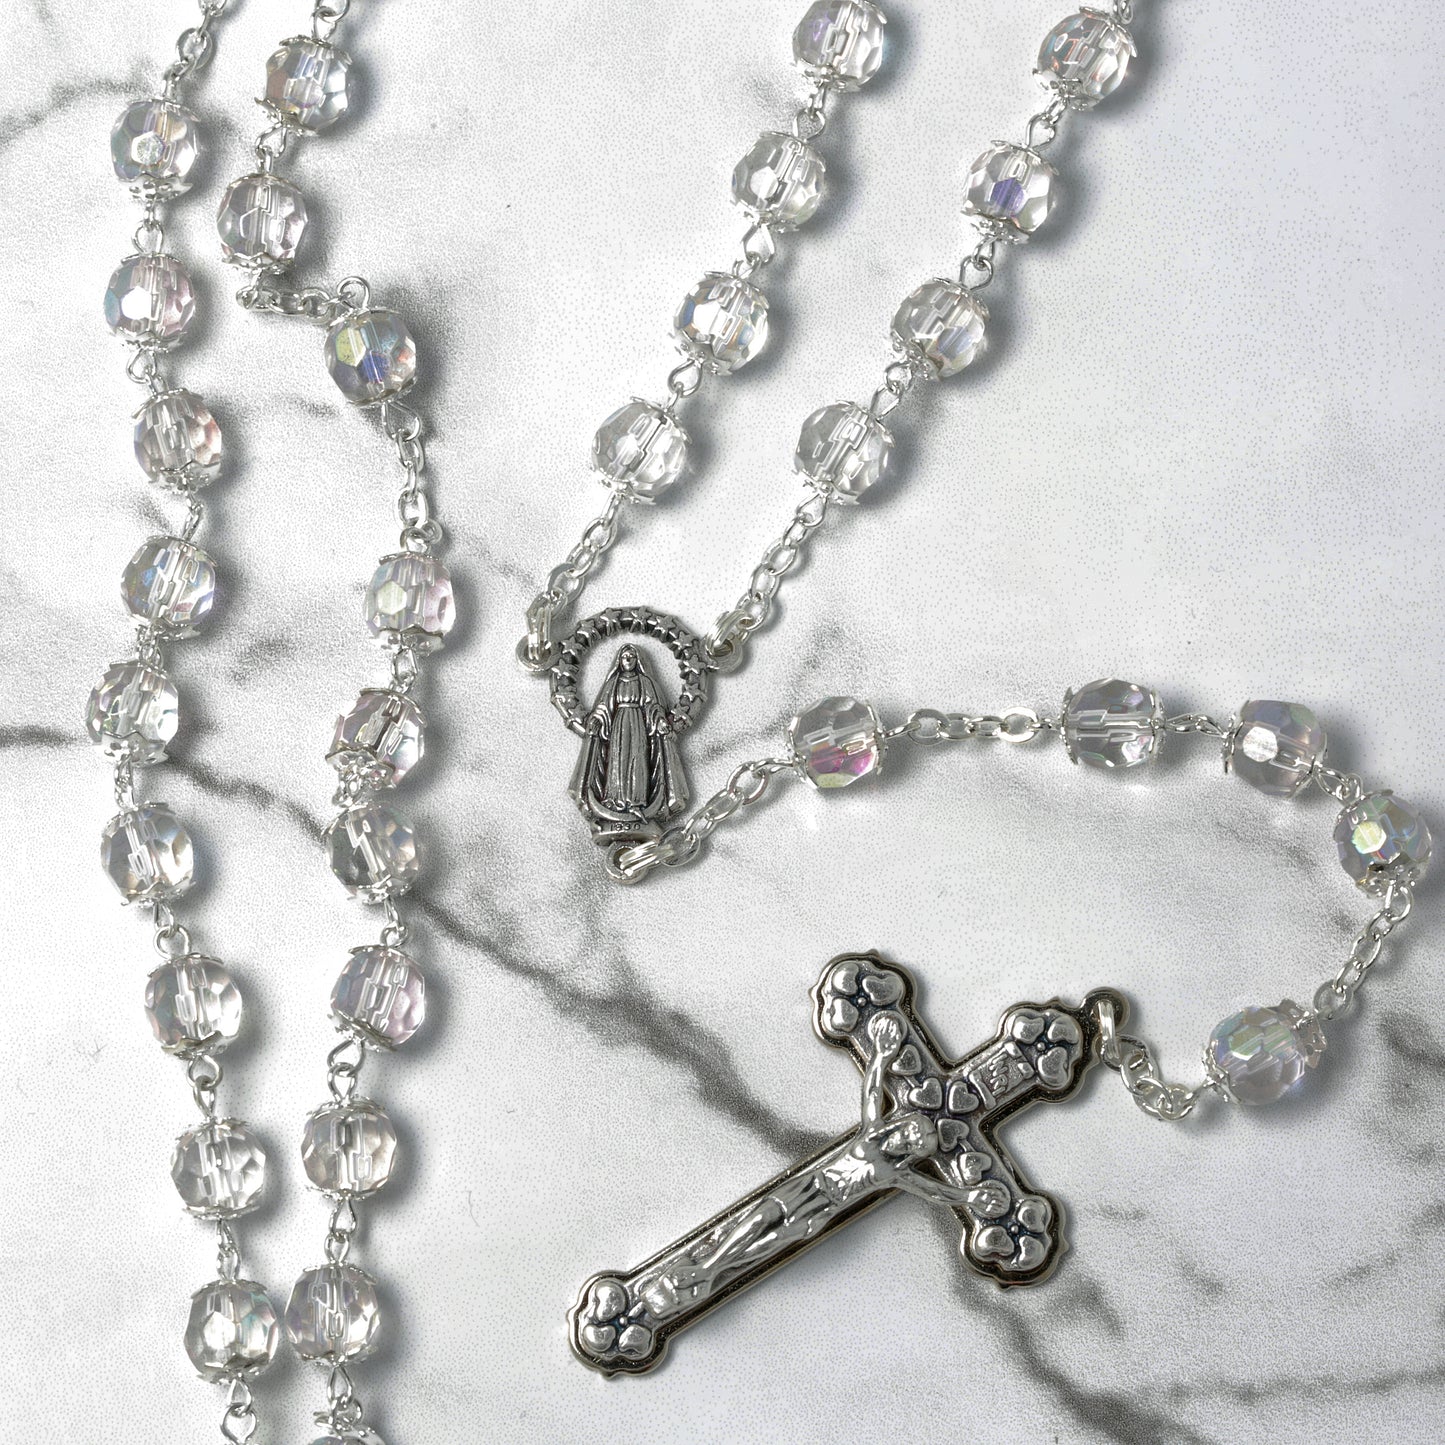 Rosary Crystal Calotas Communion Weddings Brides. Souvenirs from Italy